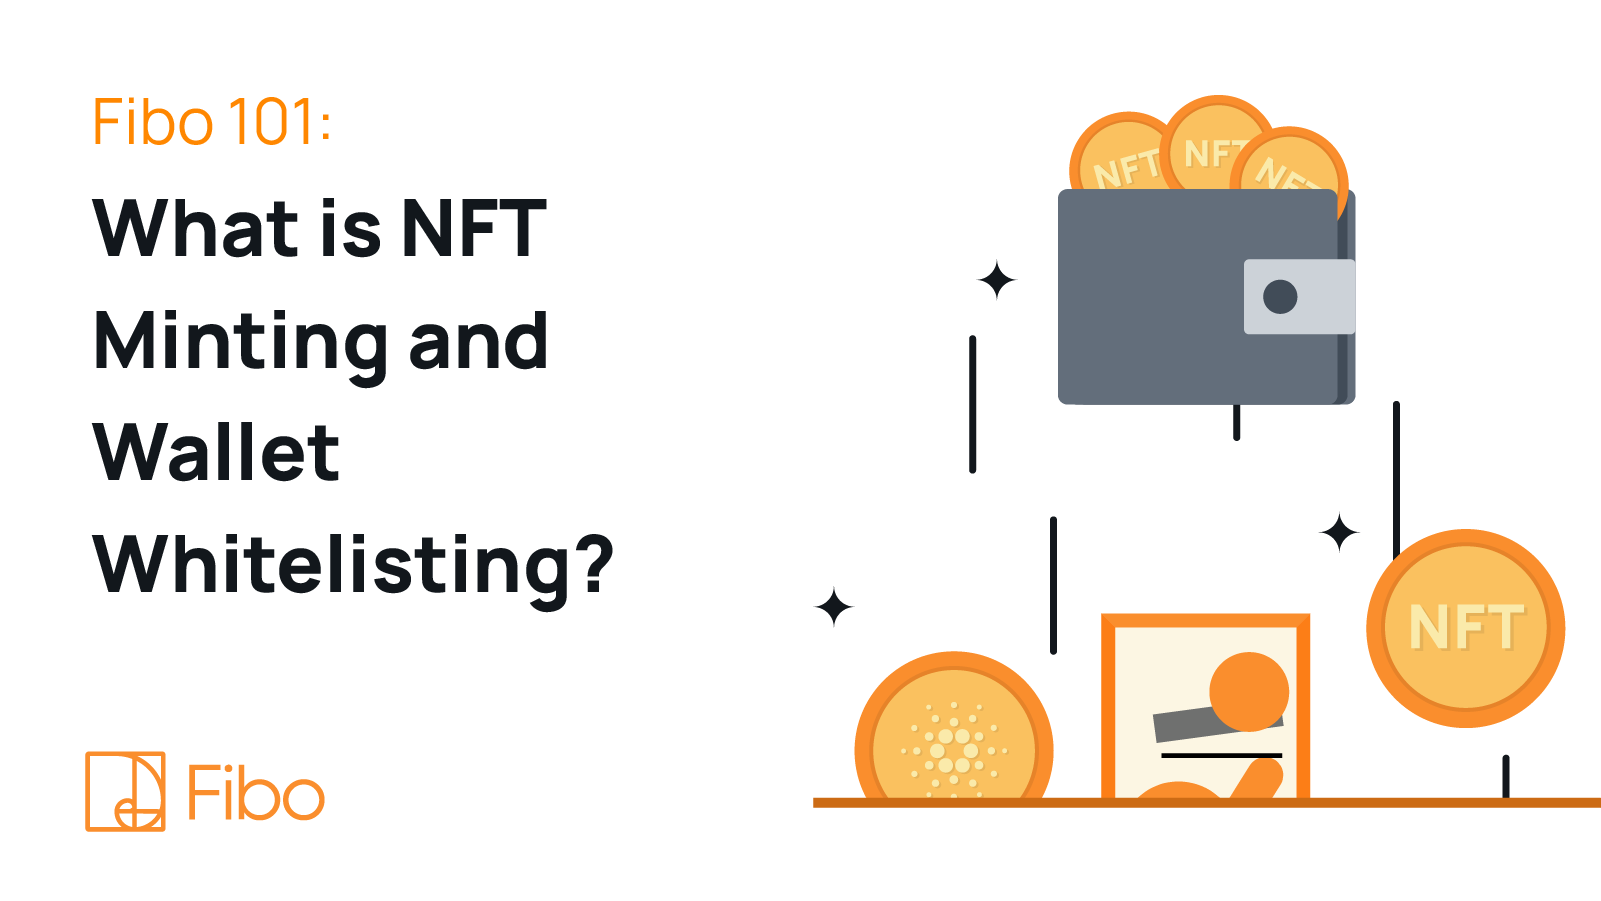 Fibo-NFT-What-is-Wallet-Whitelisting-Minting.png